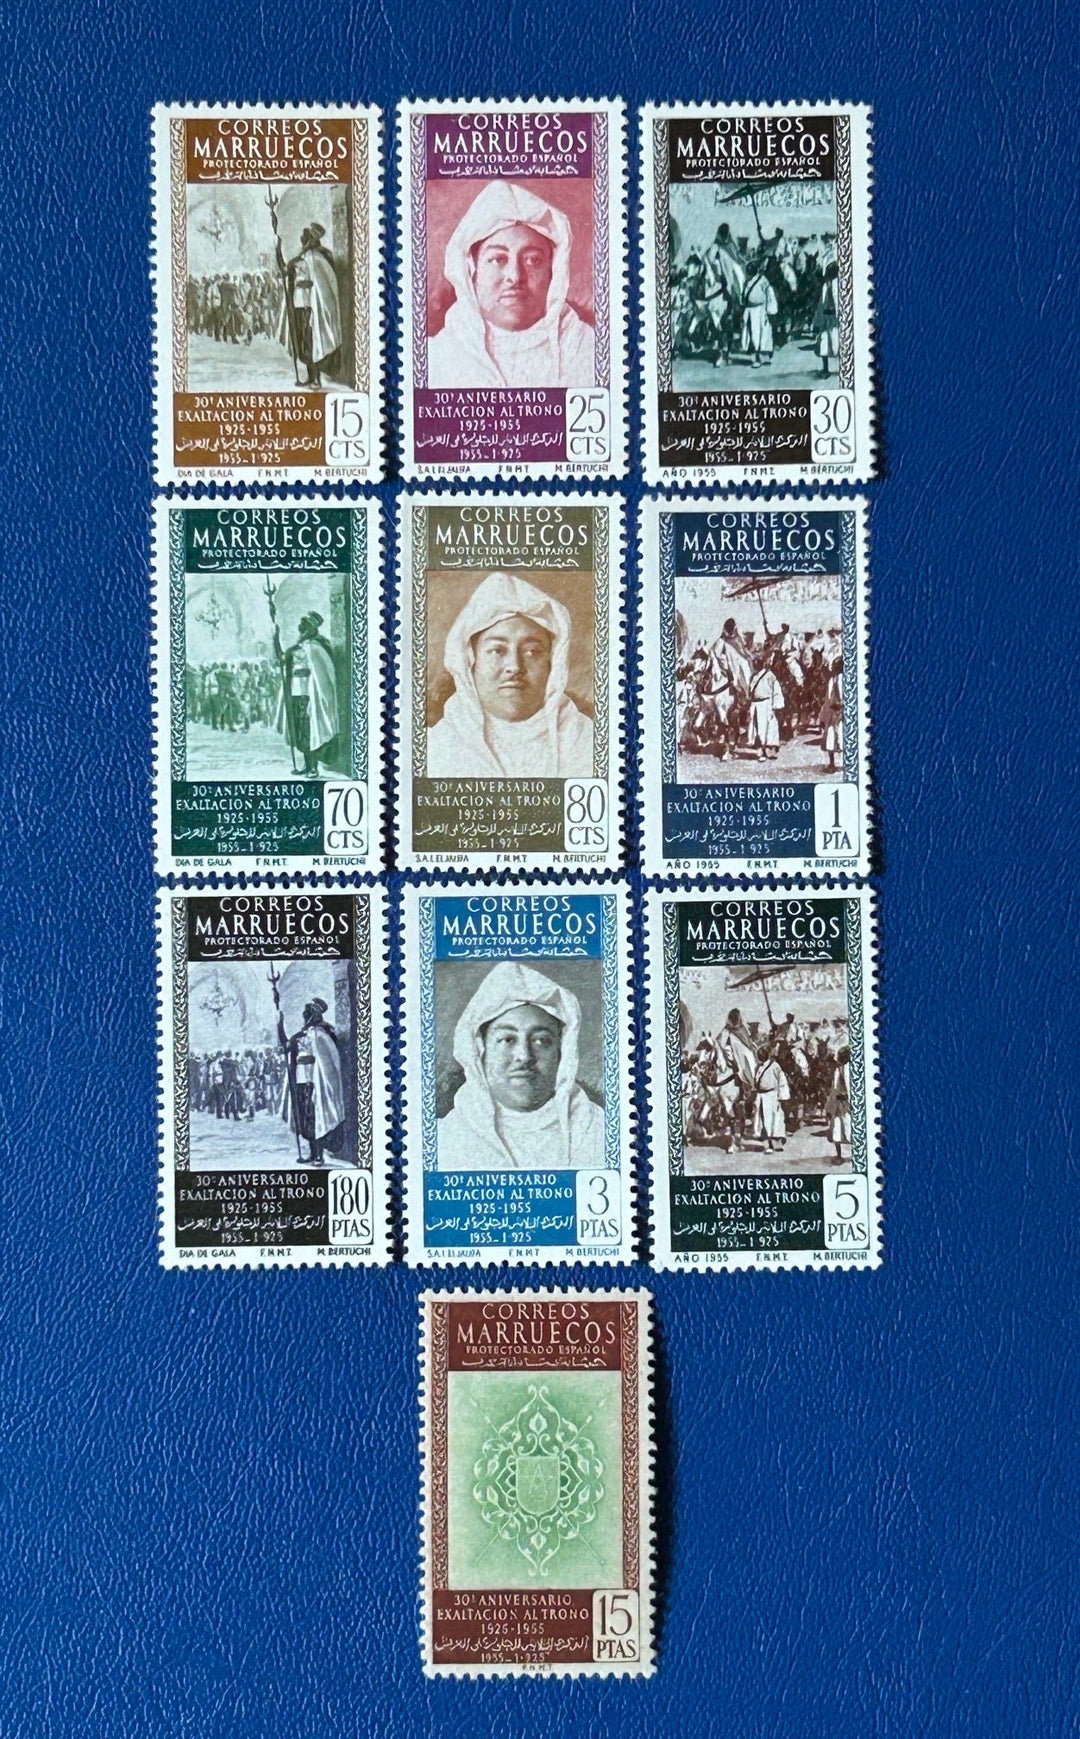 Morocco - Original Vintage Postage Stamps- 1955 - Ascension to Throne Moulay Hassan - for the collector or crafter